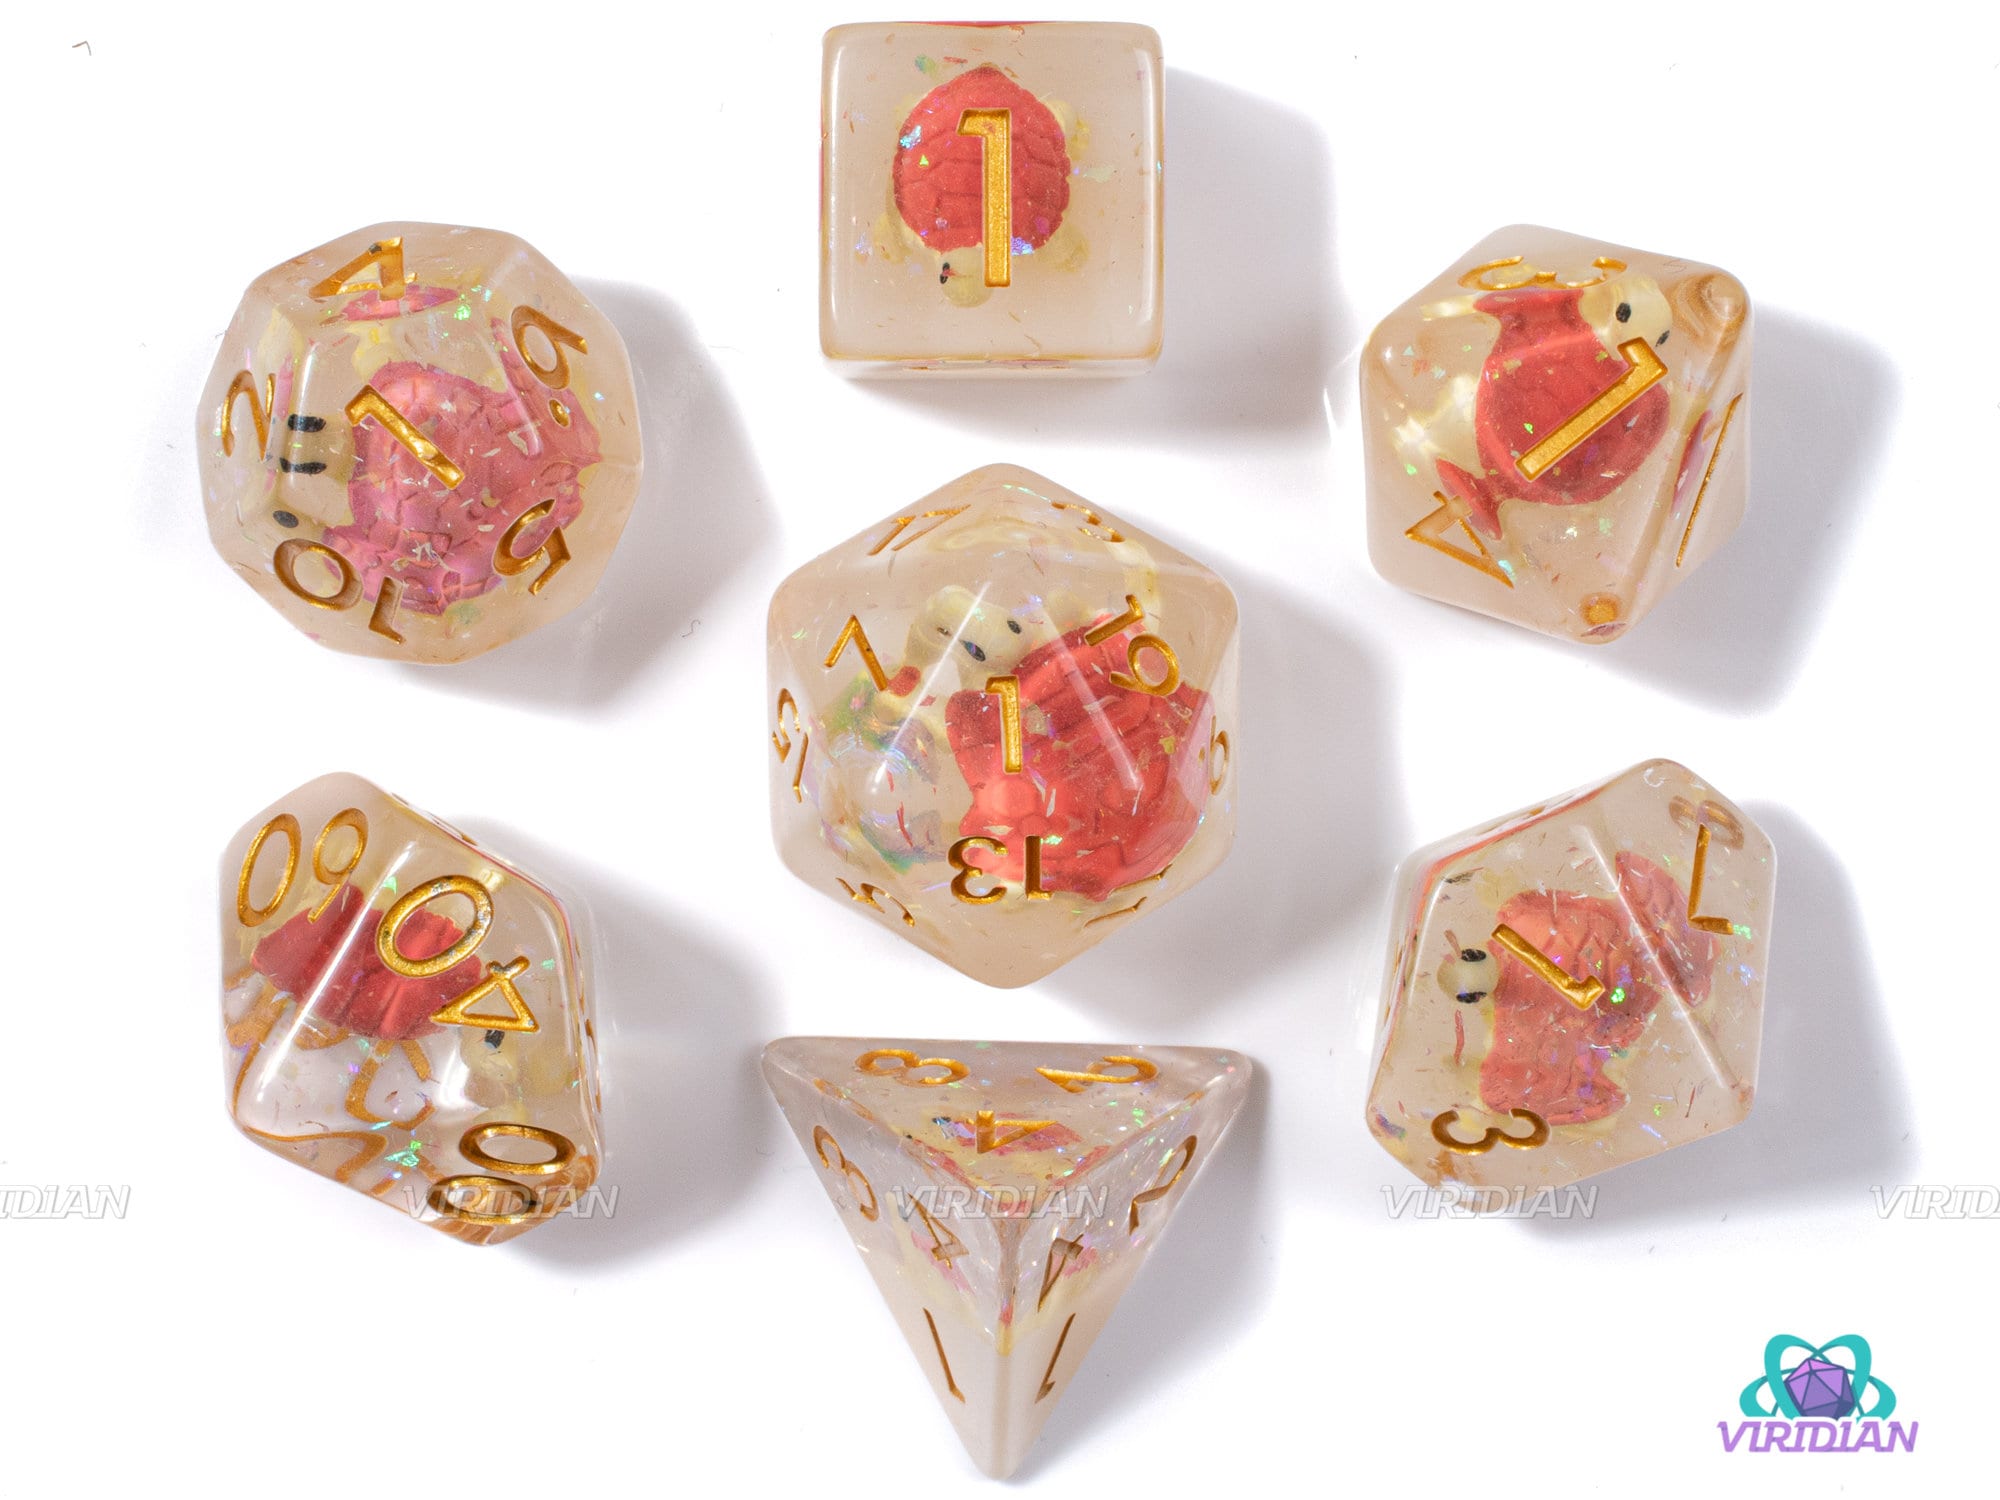 Koopa Troopa | Turtle Charm Inside | Red, White, Clear Resin Dice Set (7) | Dungeons and Dragons (DnD)